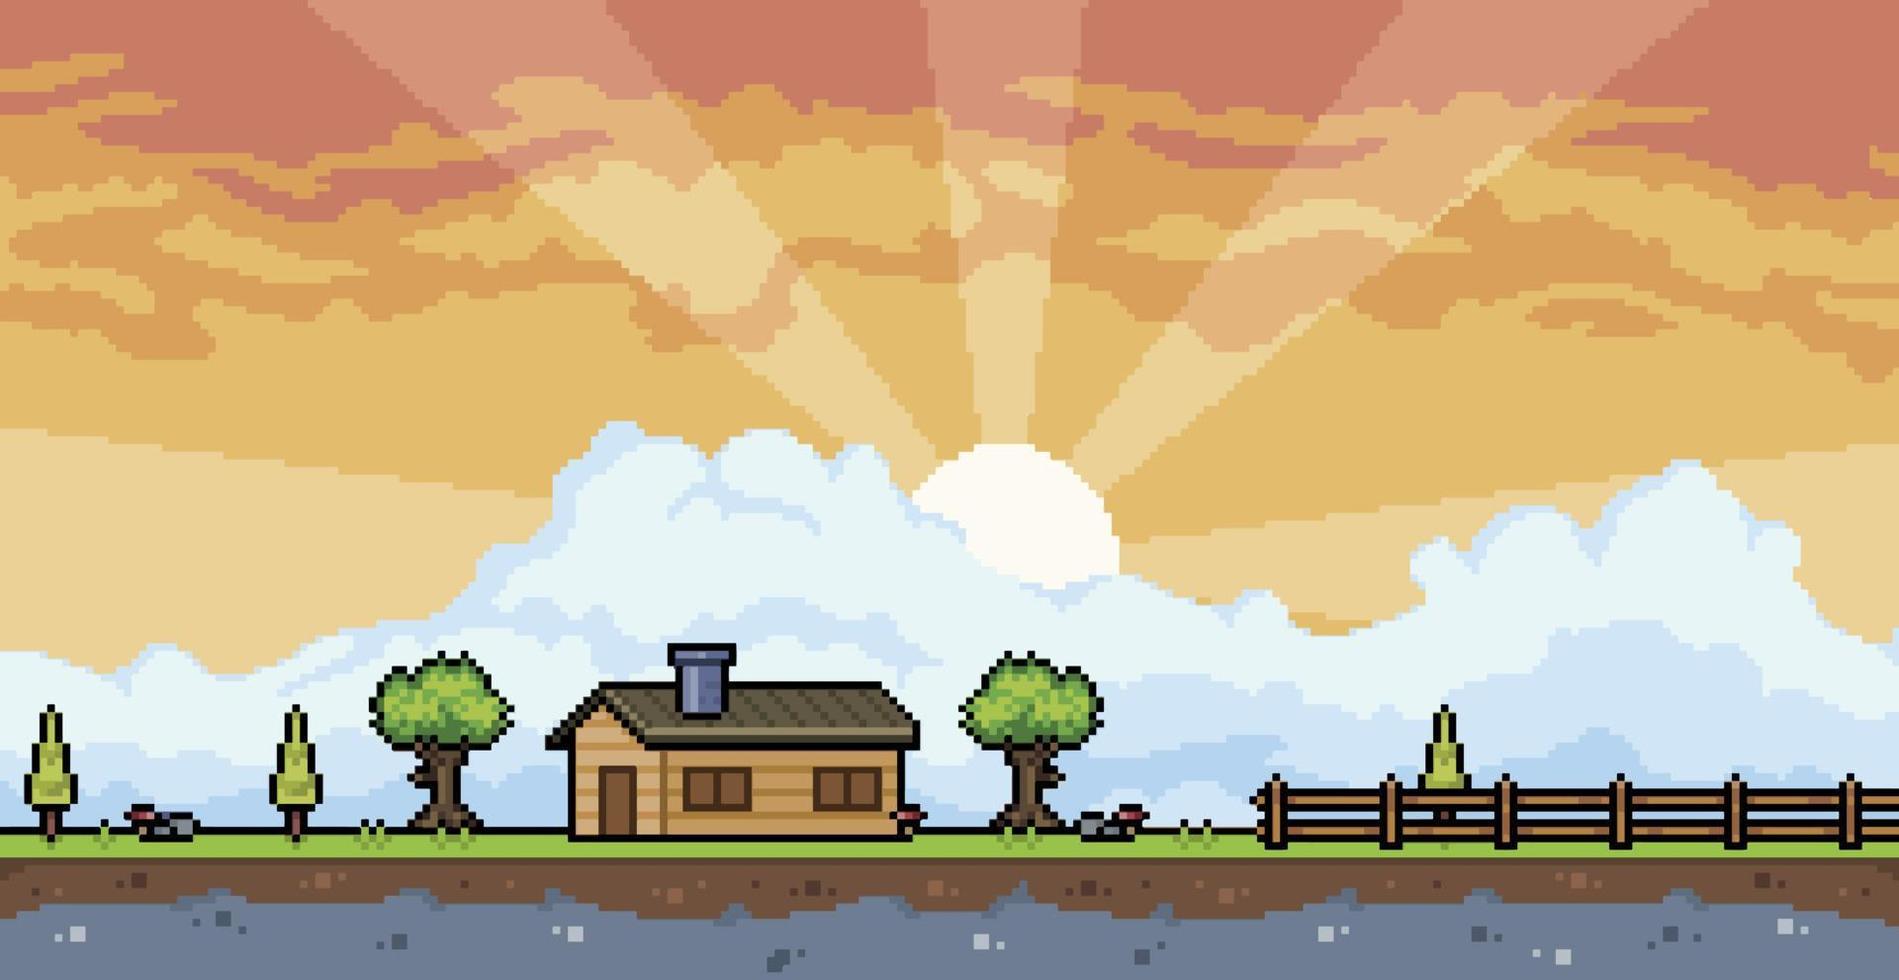 Pixel art countryside house landscape with sunset and clouds background 8bit game background vector